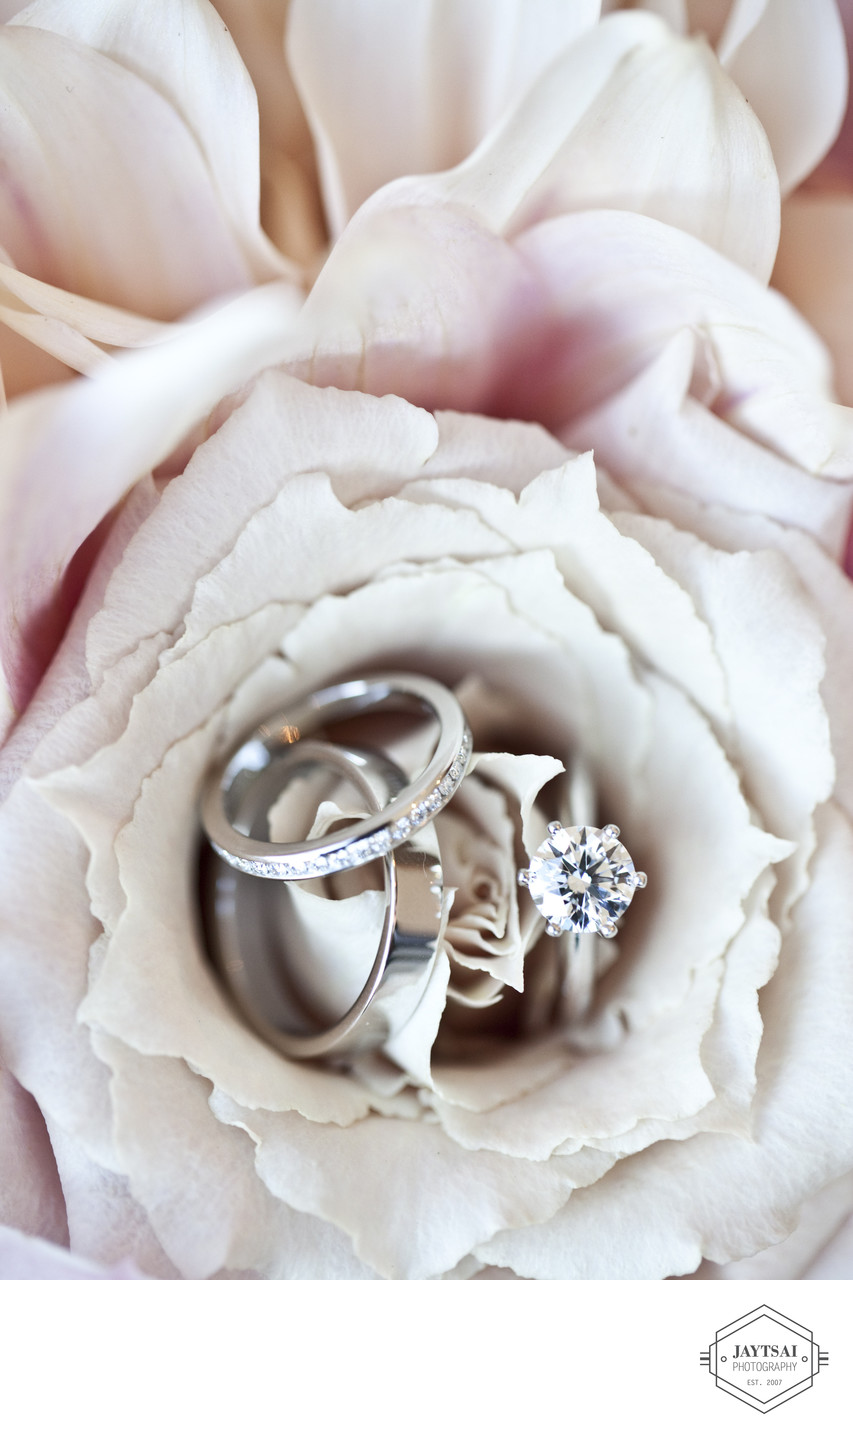 Diamond Engagement Ring and Wedding Bands in a Rose